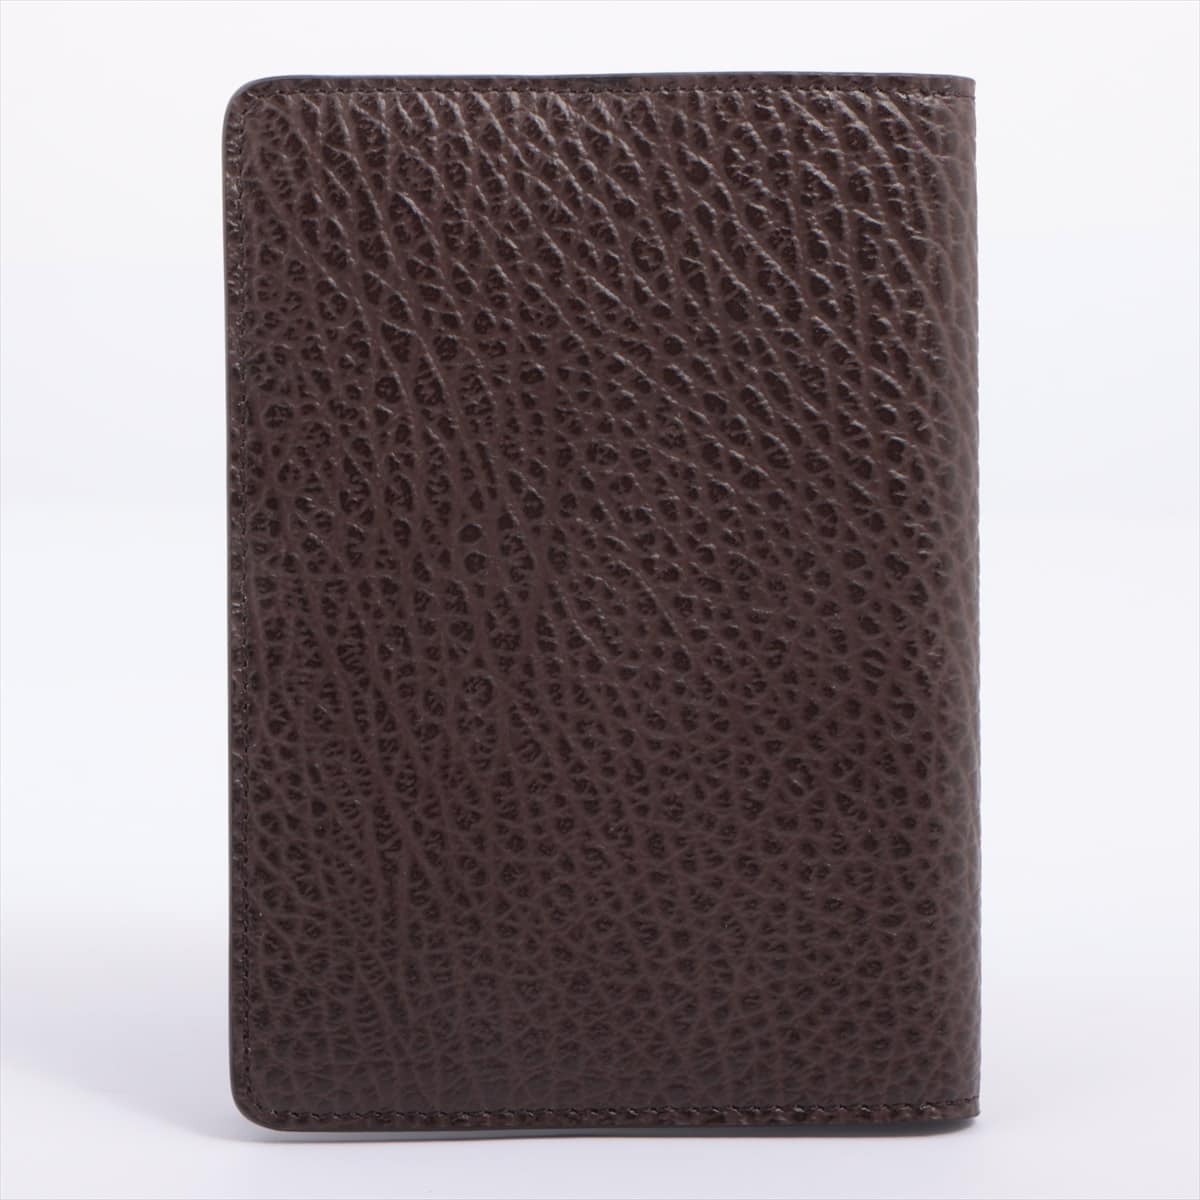 Maison Margiela 4 stitches Leather Notebook cover Brown